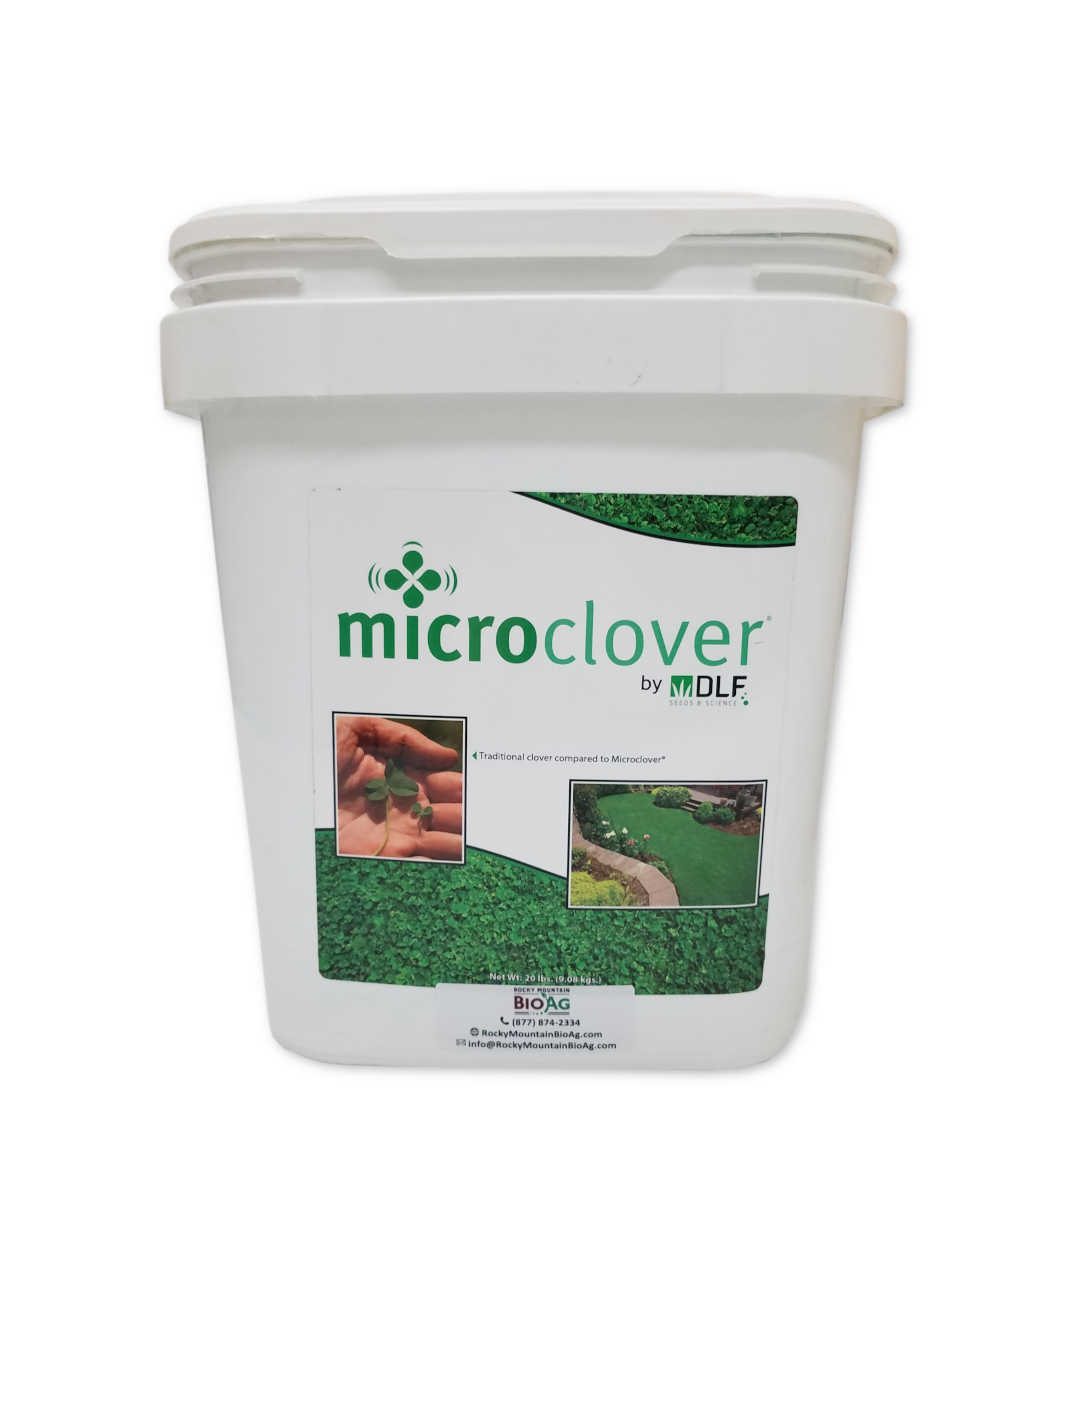 DLF Microclover Lawn Seeds in 20lb Pail